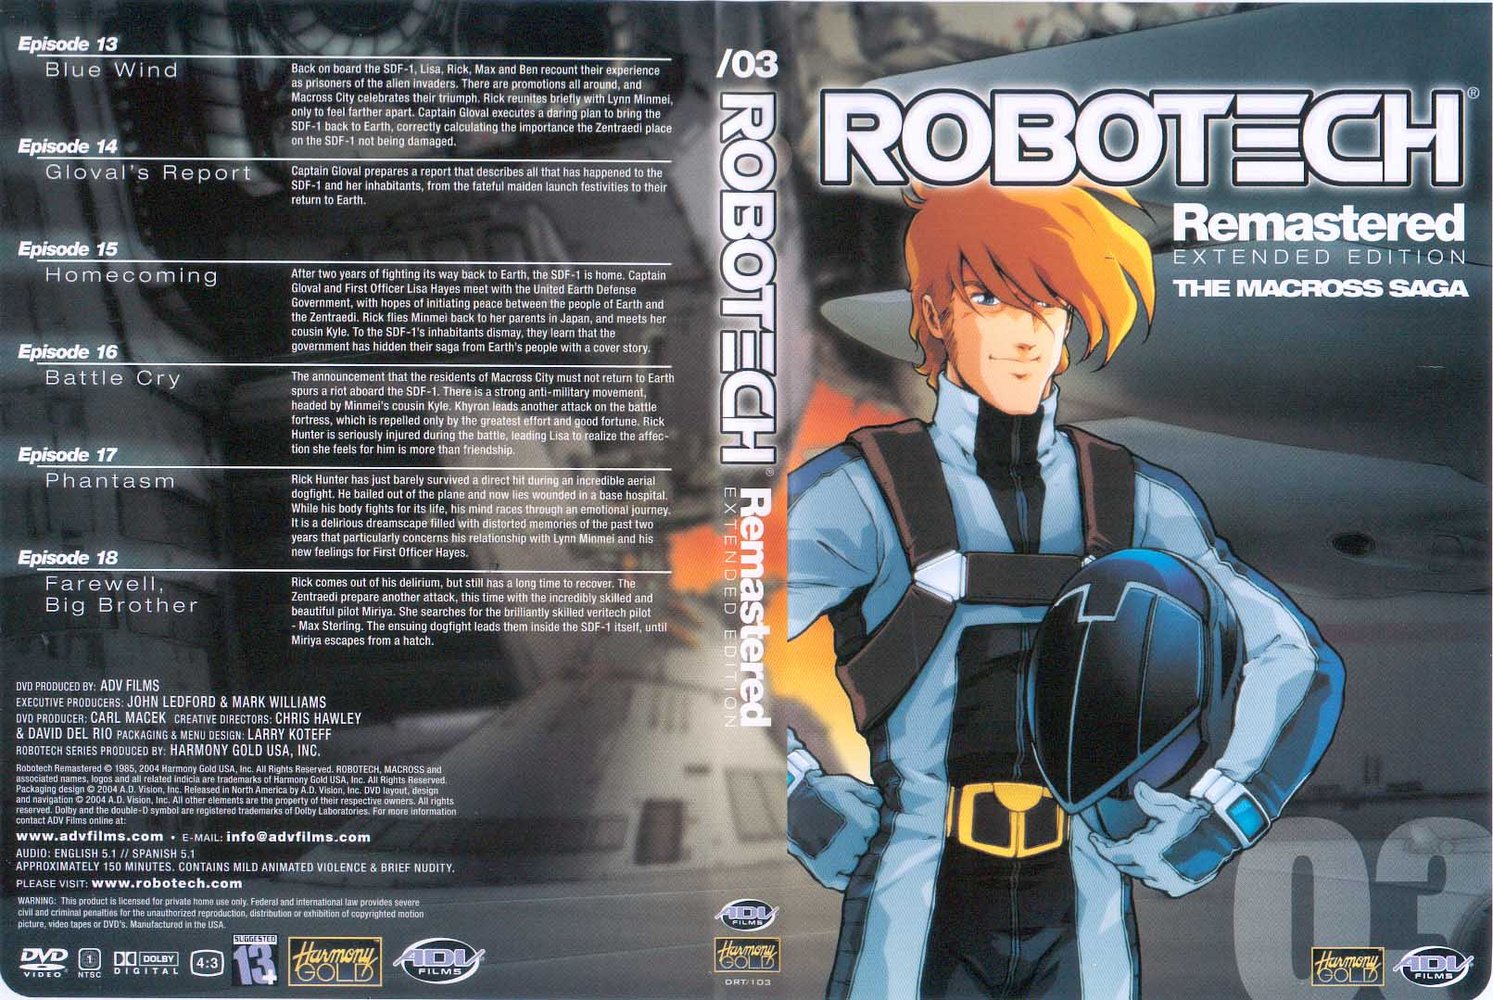 [Robotech_Remastered_Extended_Edition_Episodes_13-18-front.jpg]